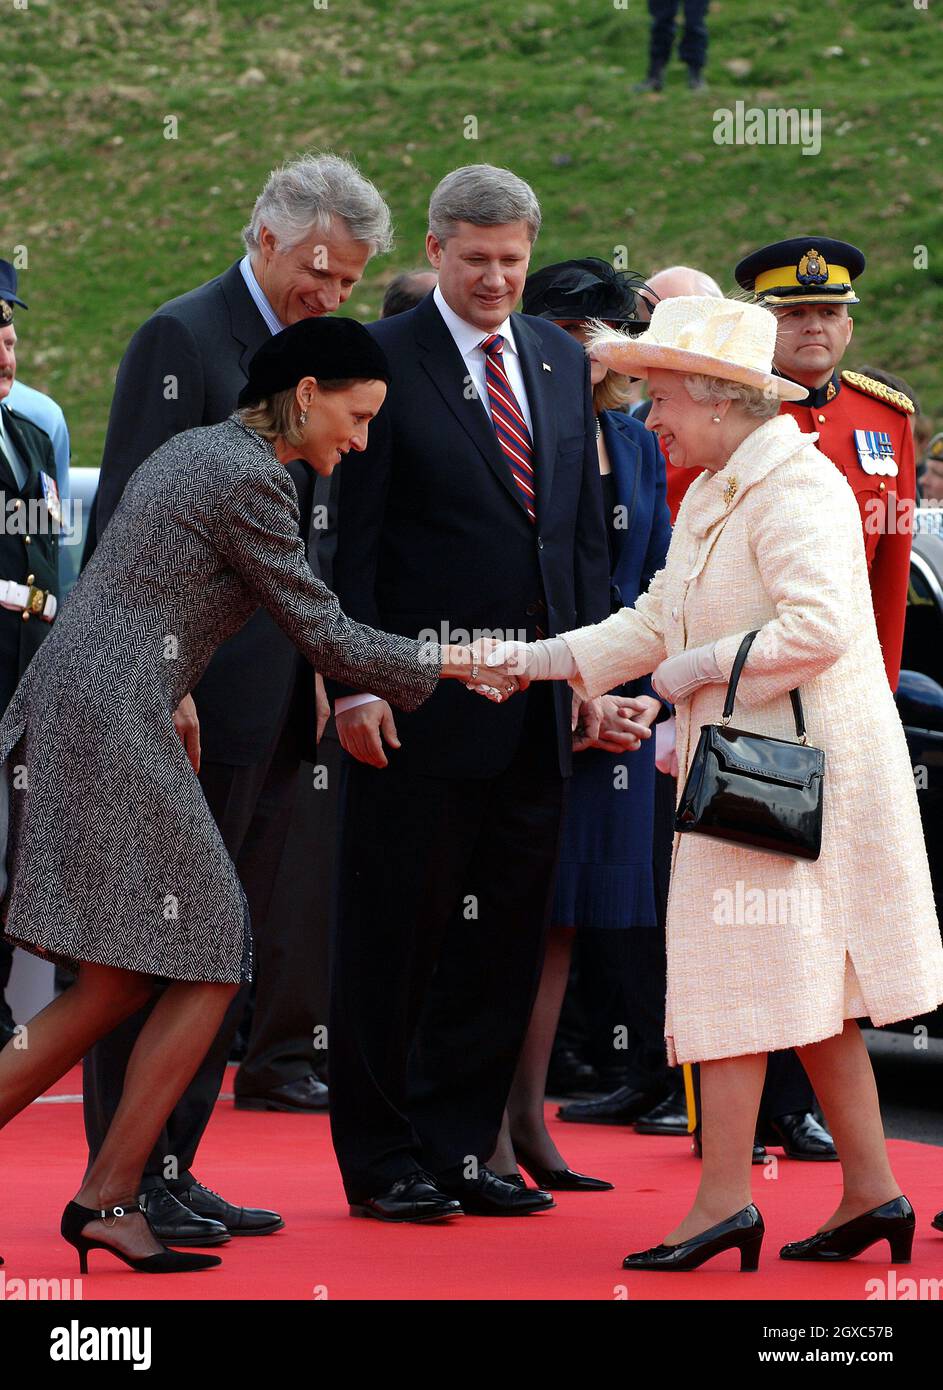 Queen Elizabeth II greets Marie-Laure, wife of French Prime Minister  Dominique de Villepin, during a ceremony to mark the 90th anniversary of  the Battle of Vimy Ridge, in which more than 3,500